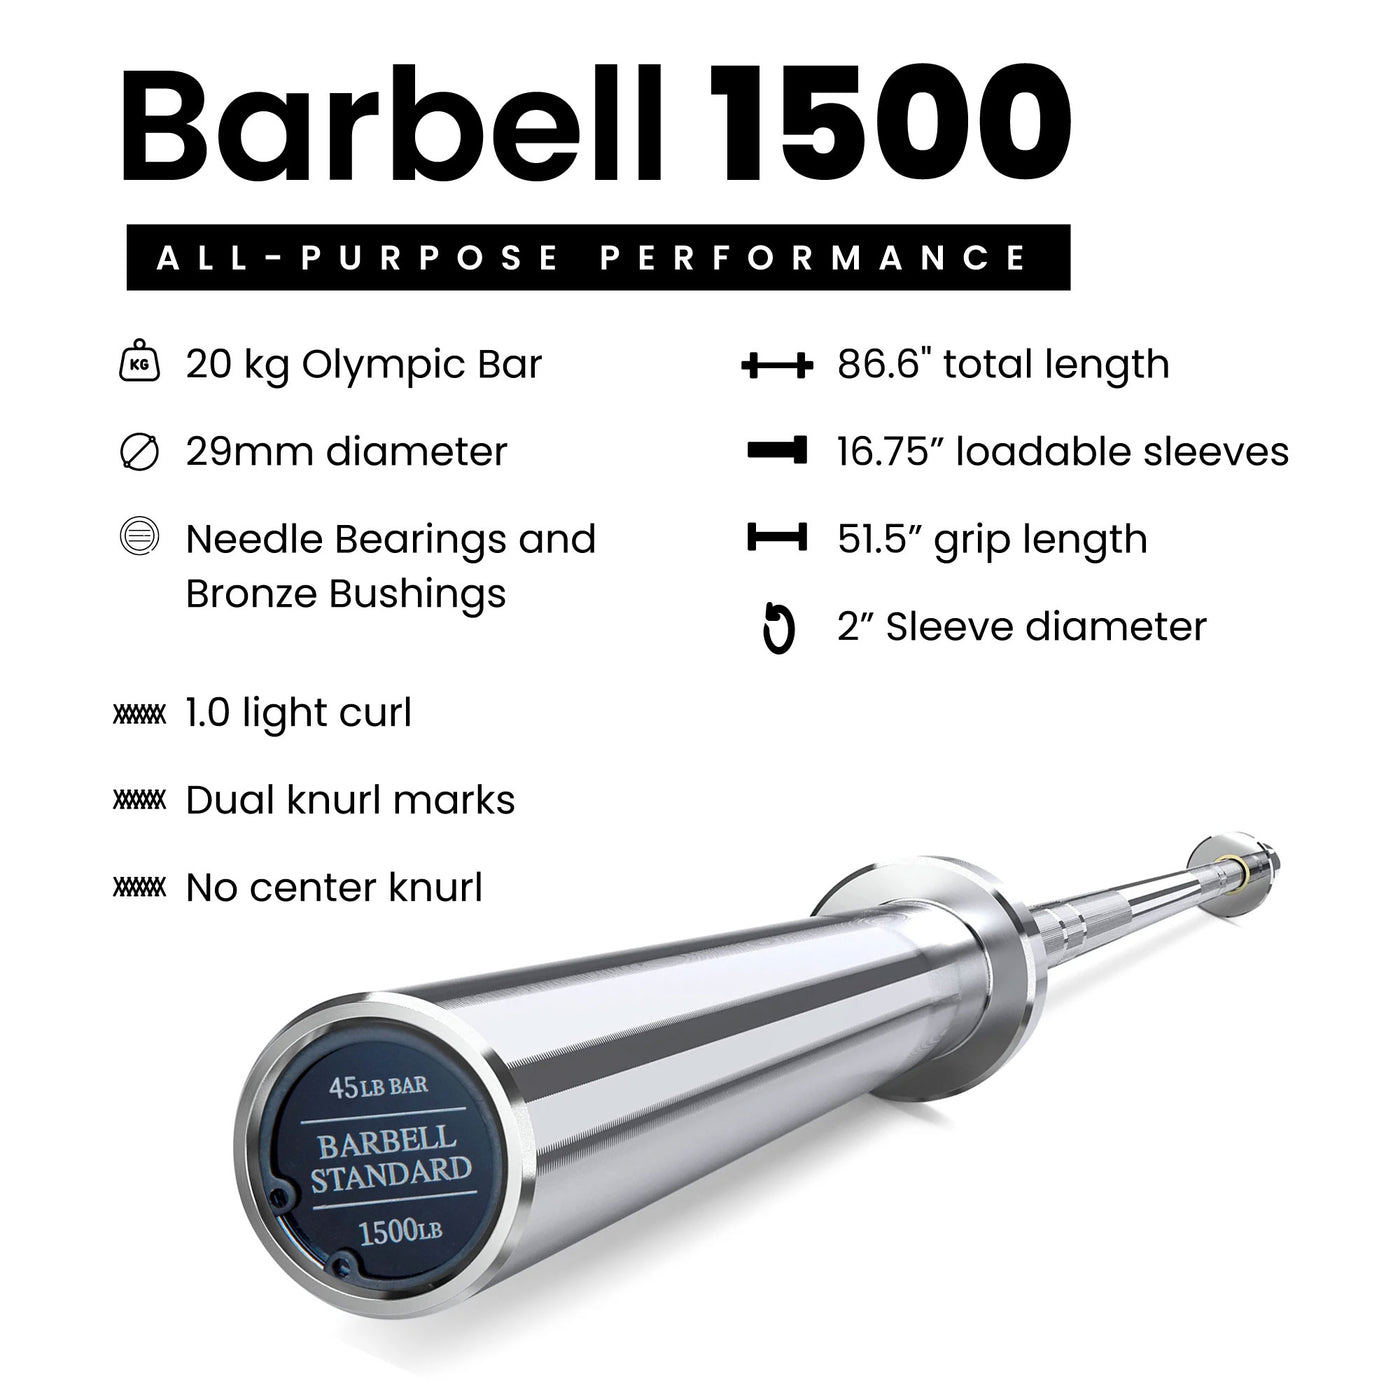 Barbell 1500 Sets